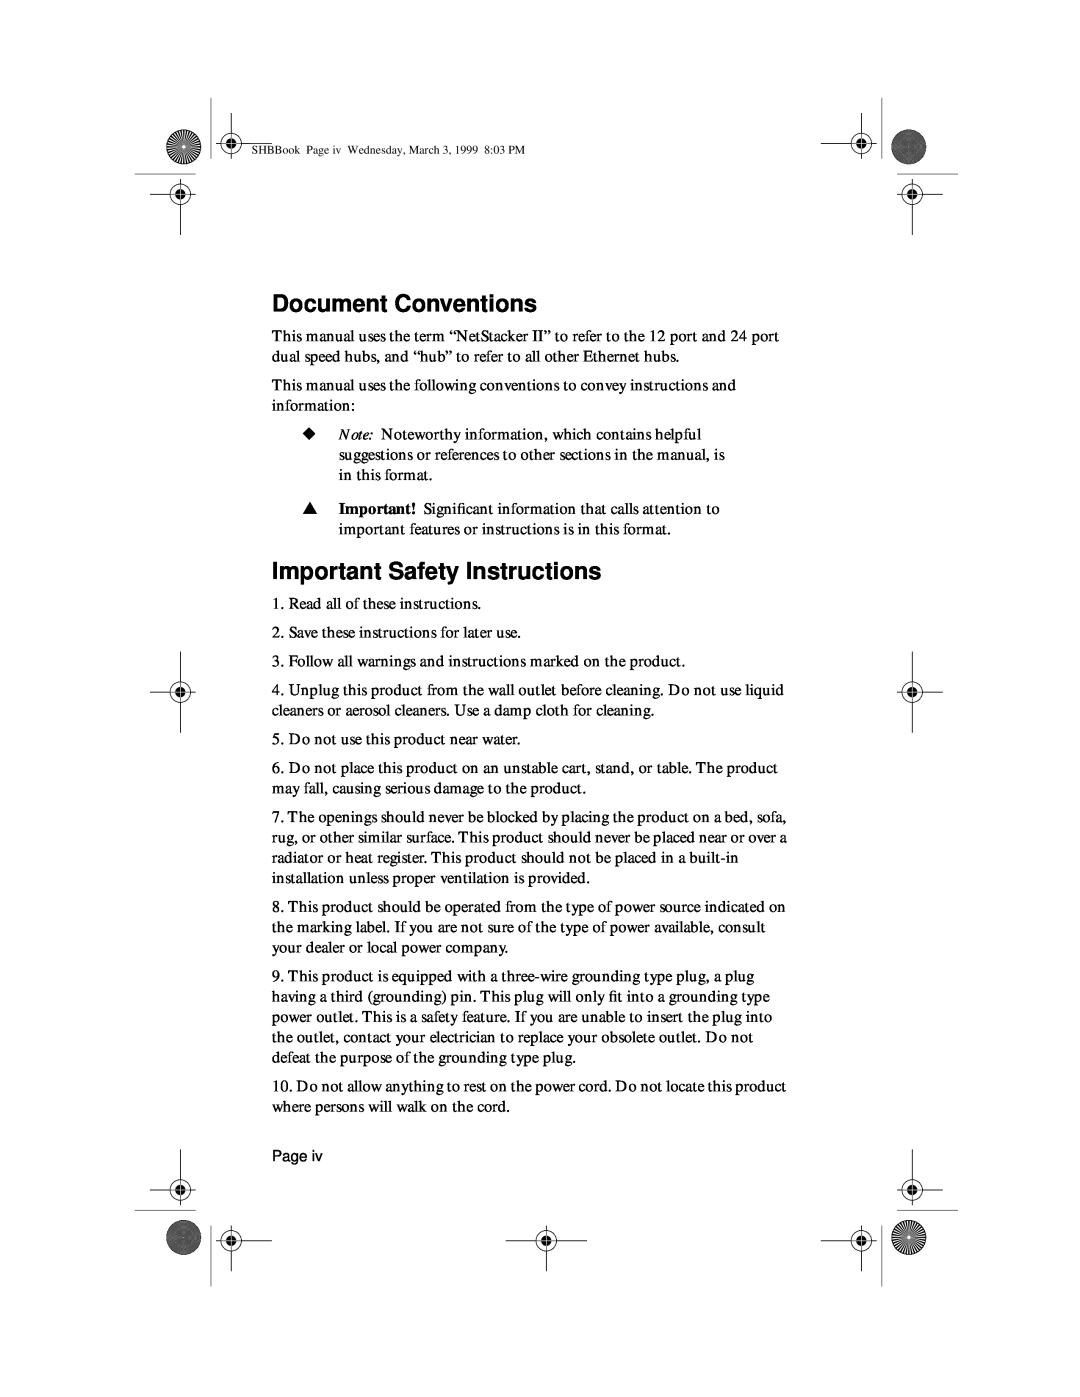 Asante Technologies II user manual Document Conventions, Important Safety Instructions 